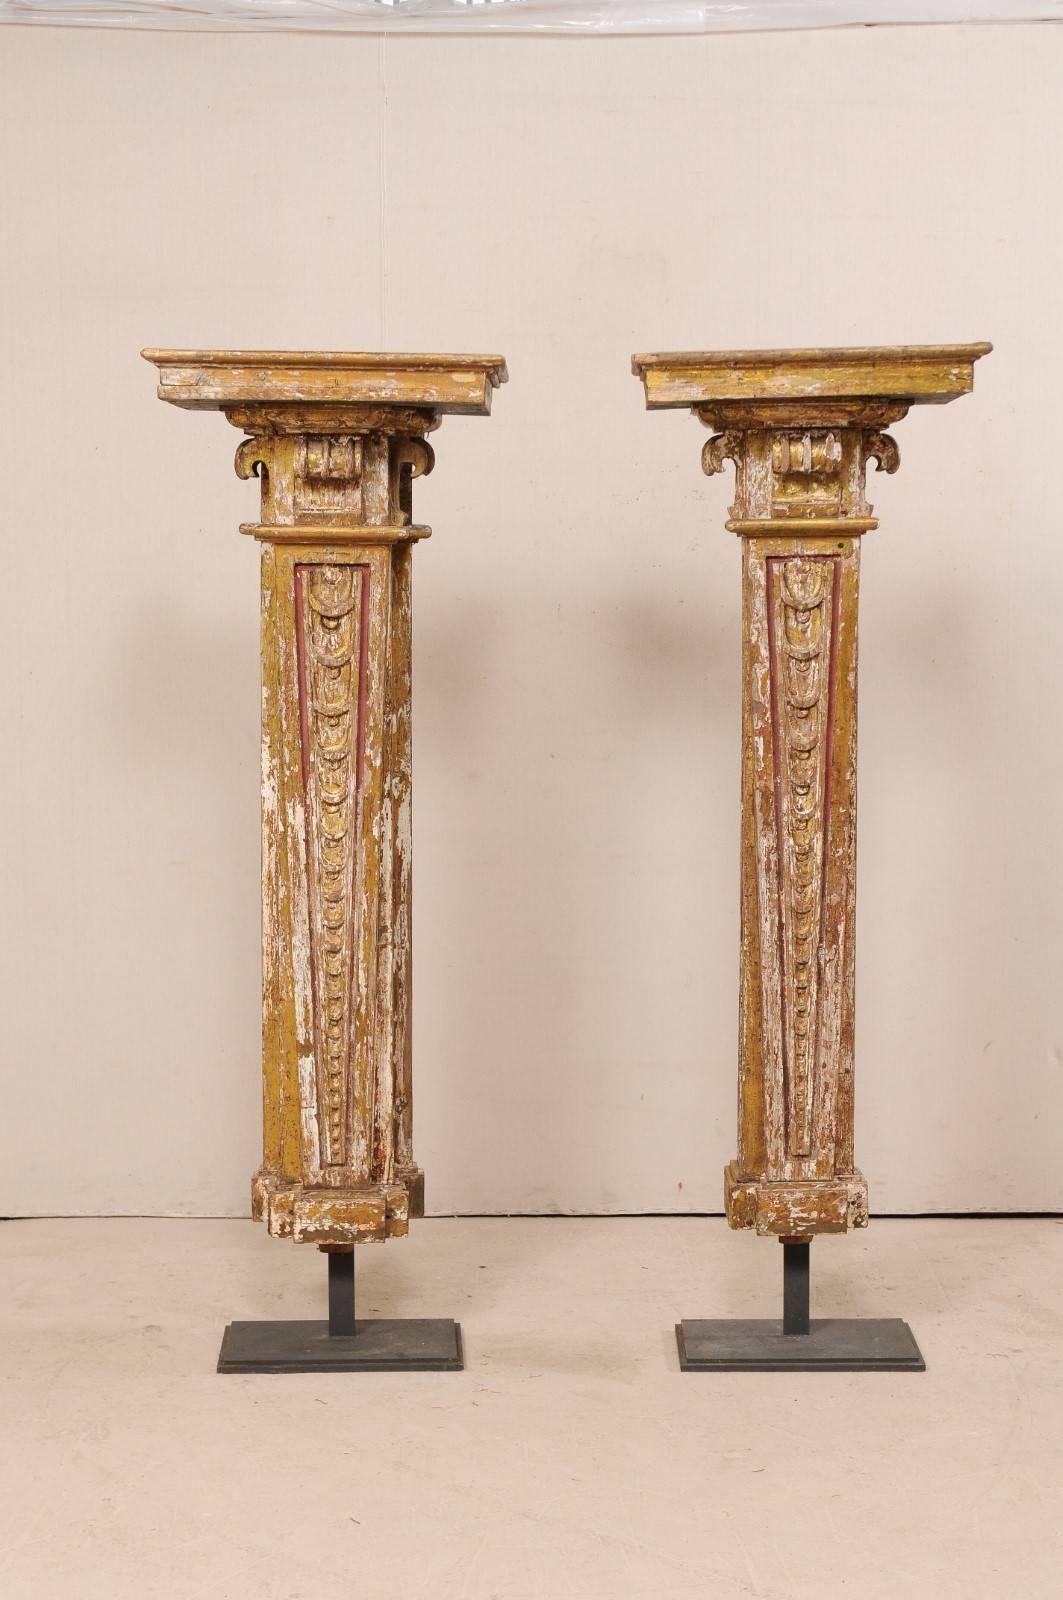 A pair of Italian columns, from the early 18th century, displayed on iron stands. This exquisite pair of early 18th century architectural columns from Italy, standing at over 6 feet tall, have gesso and gilt over wood, with carved frieze vertically